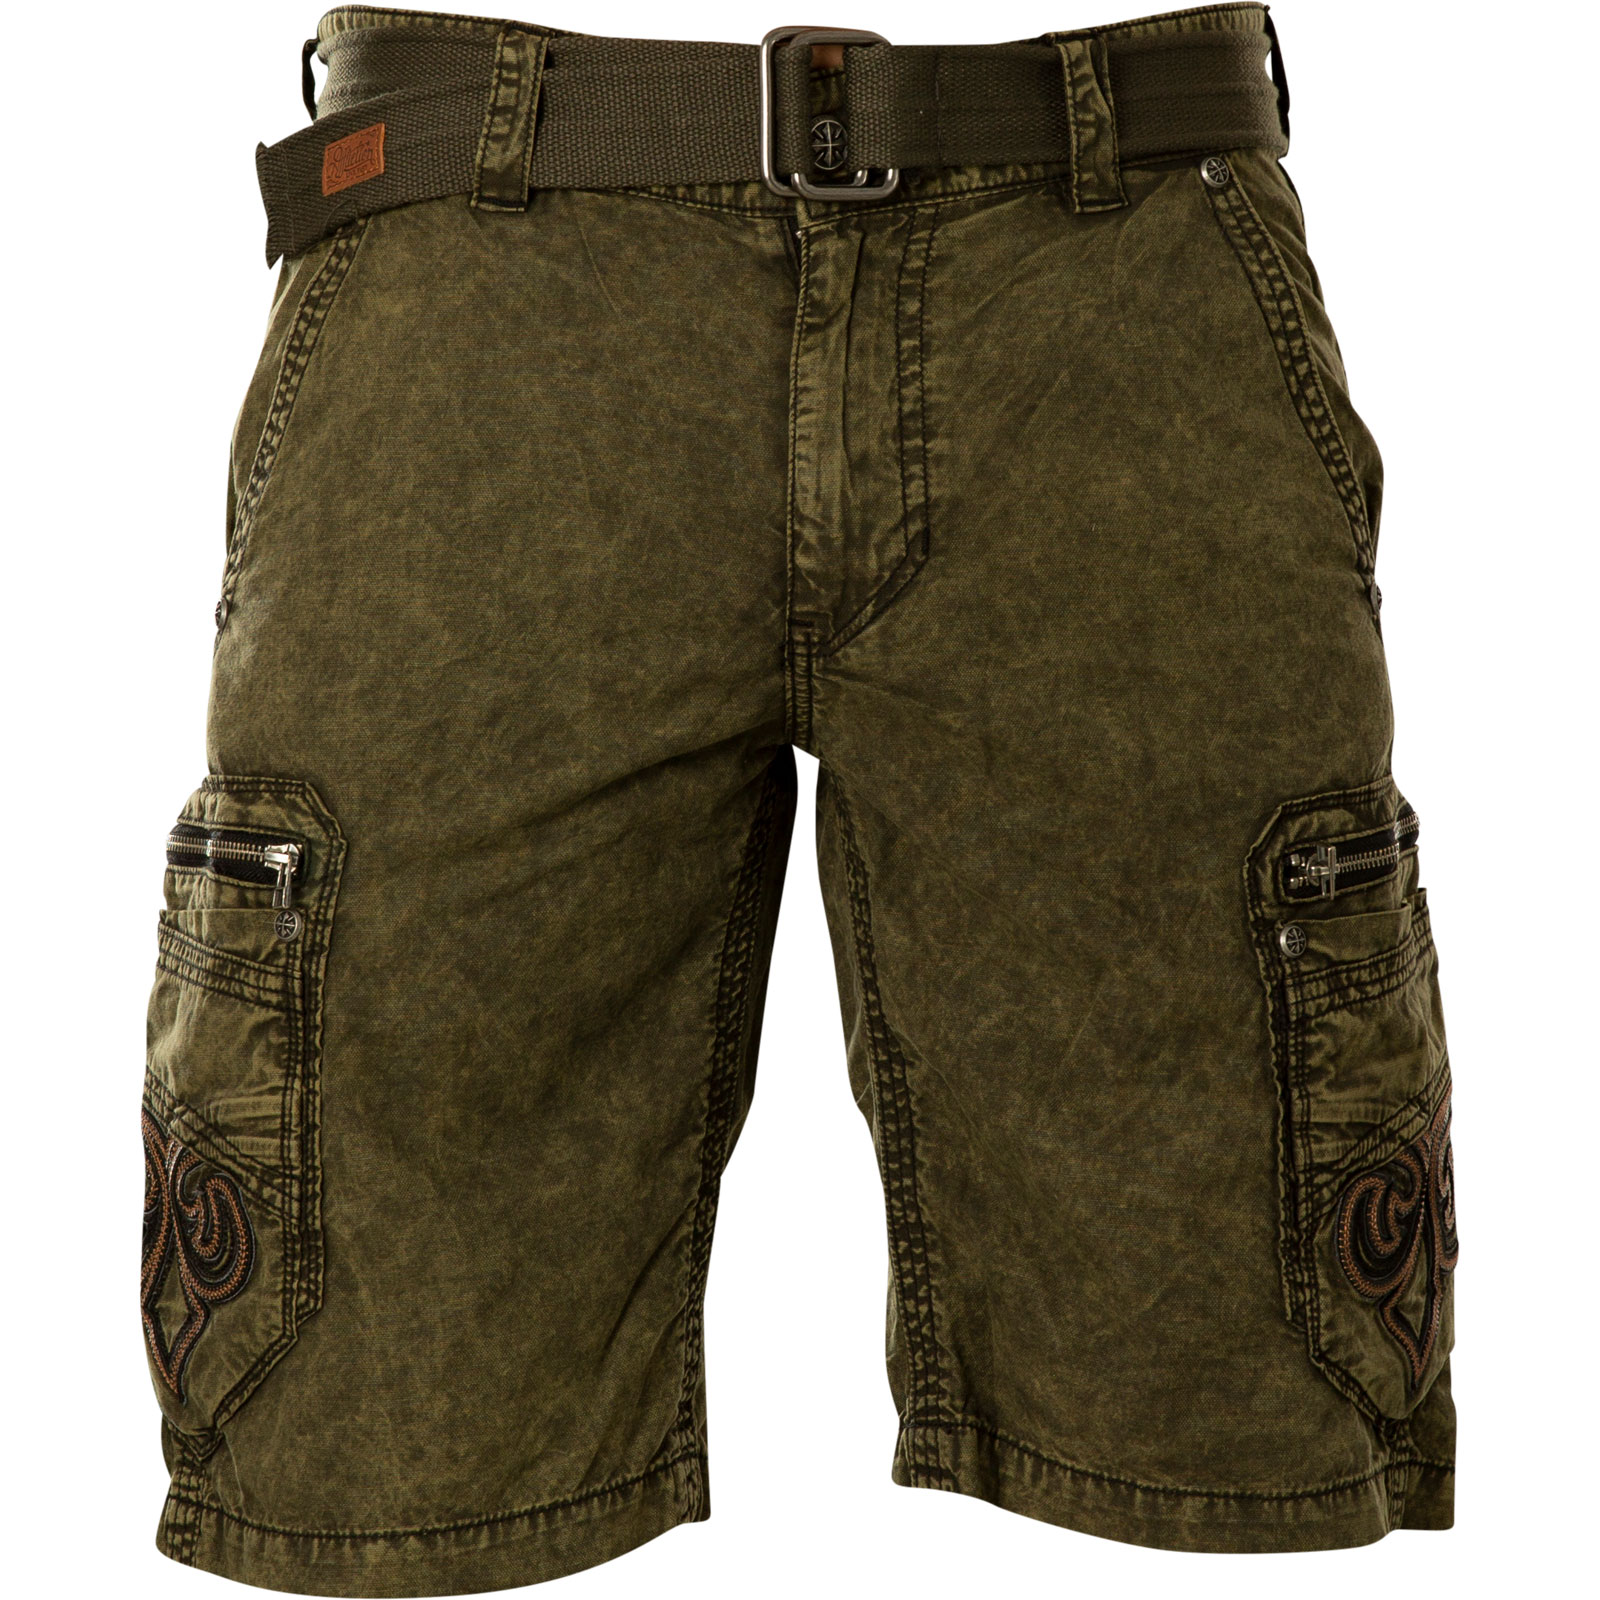 Affliction Range Cargo with flap pockets and fuax leather details